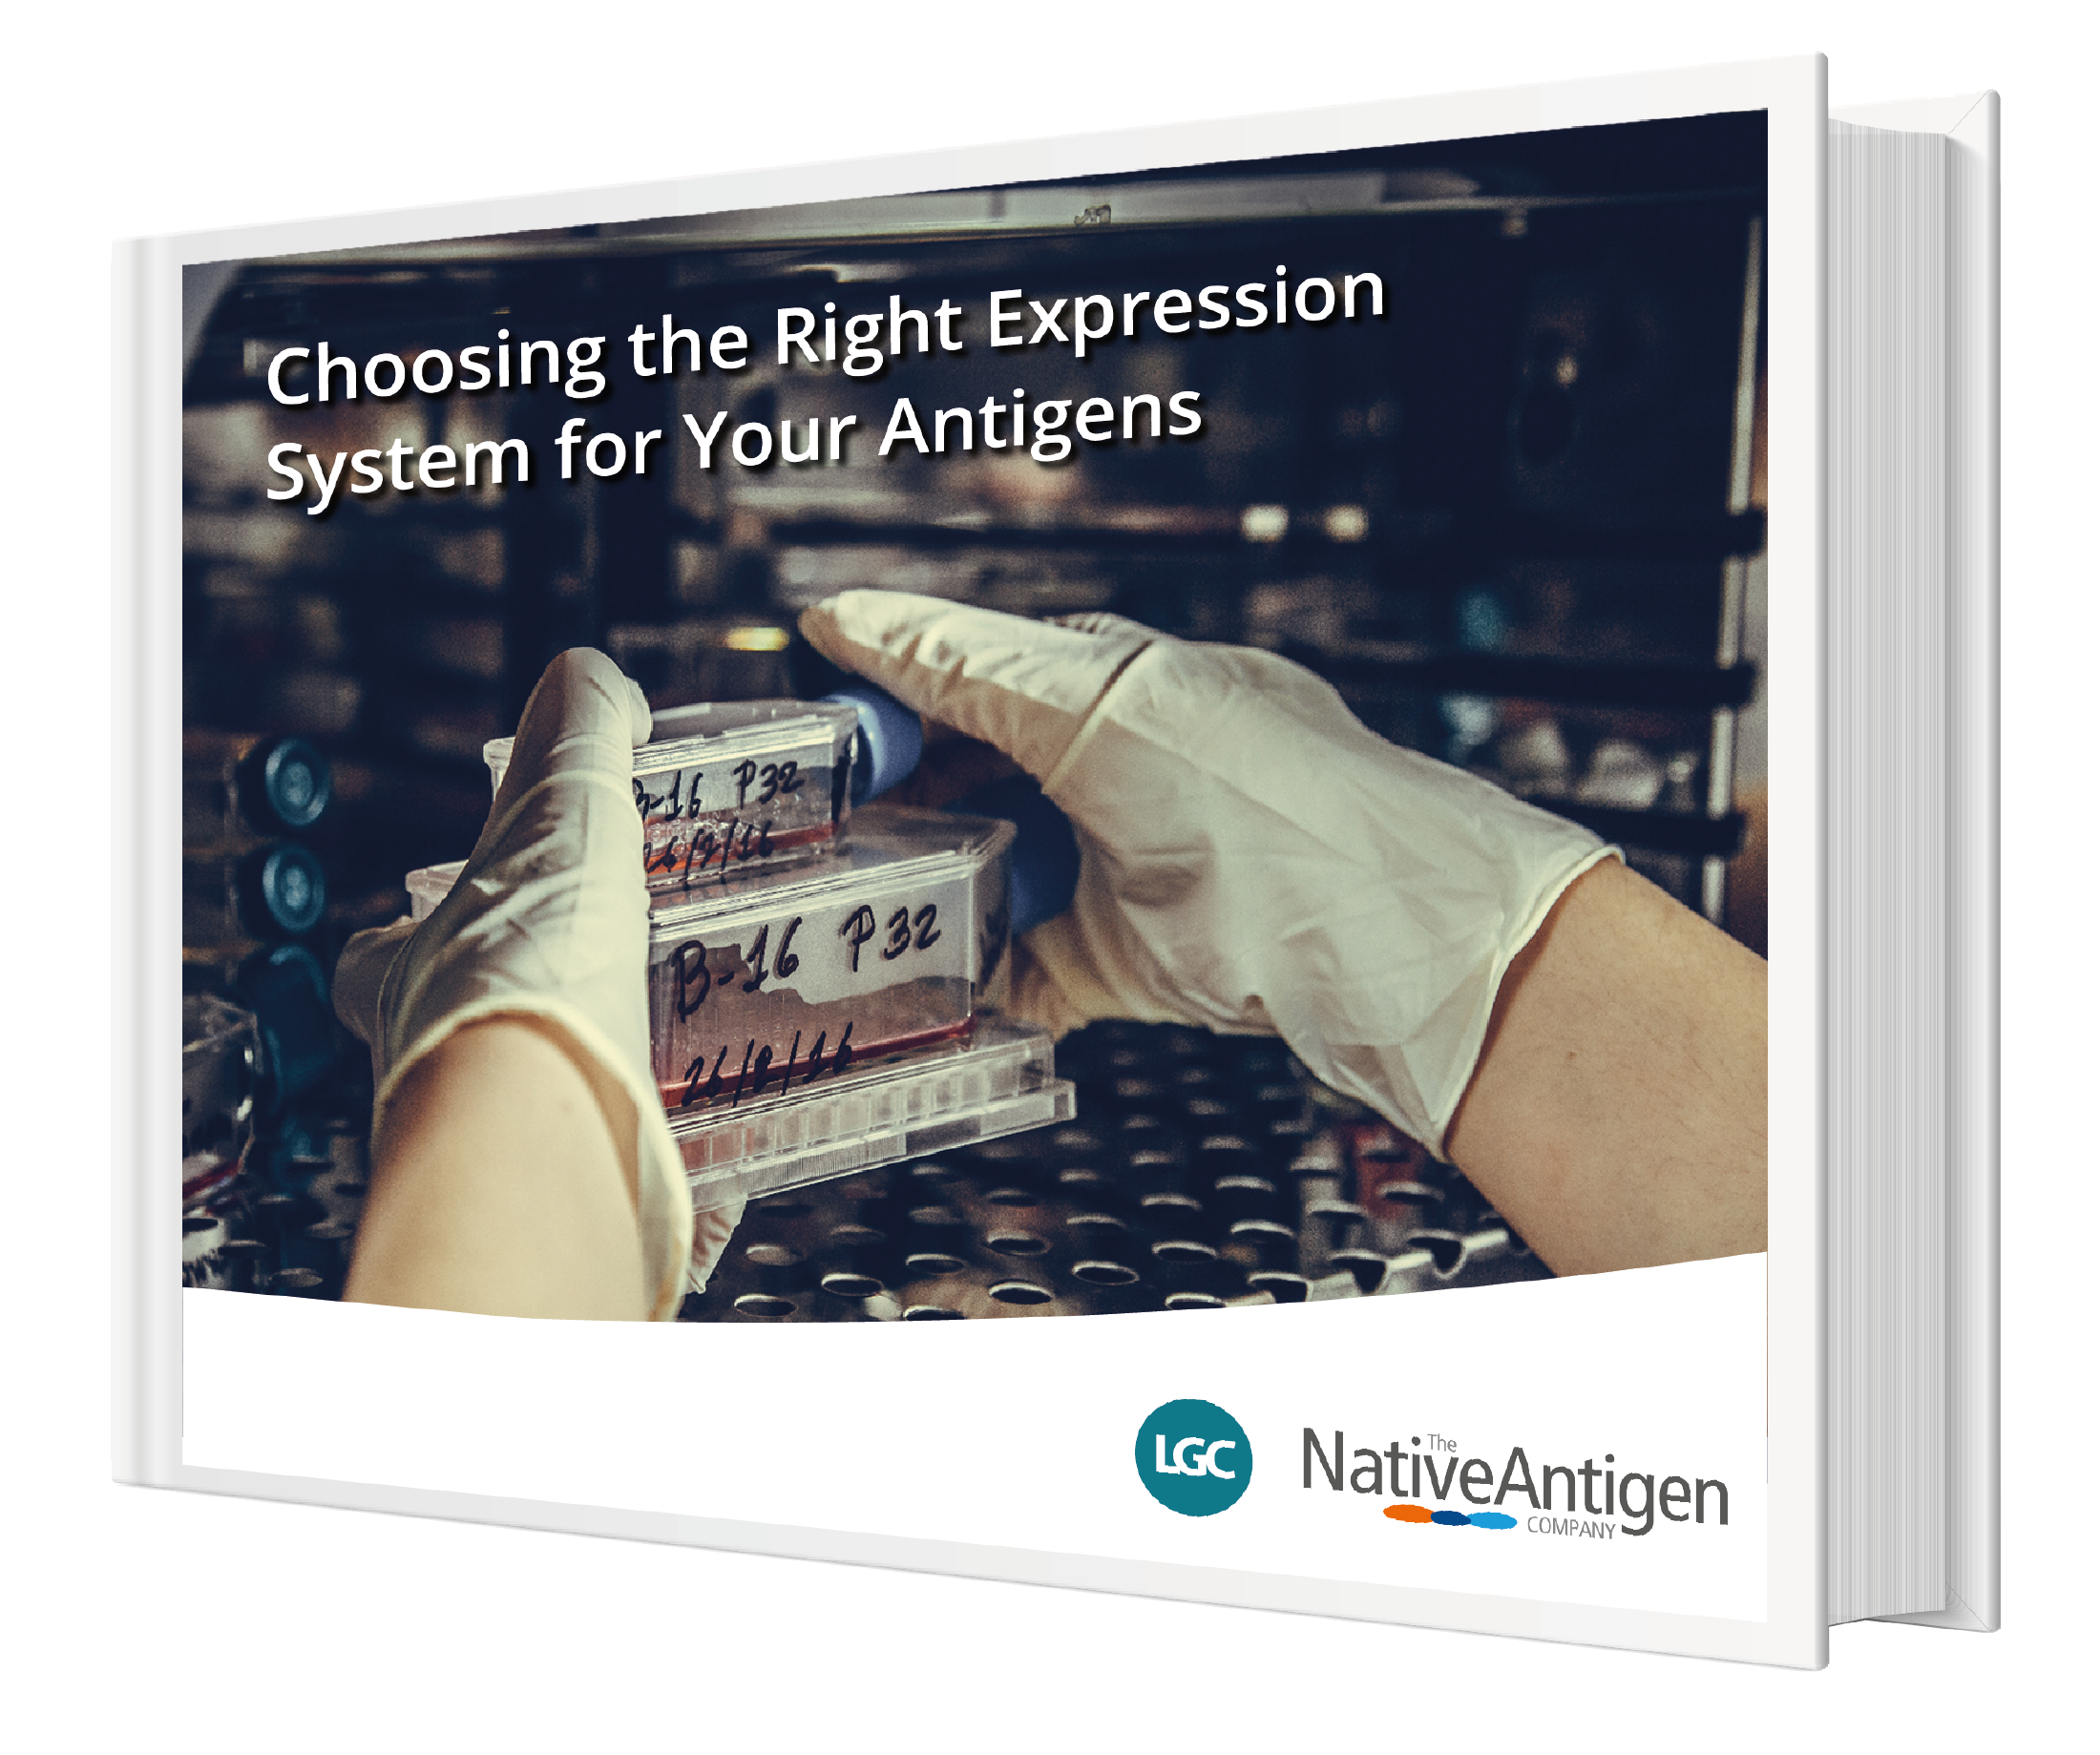 Choosing the Right Expression System for Your Antigens